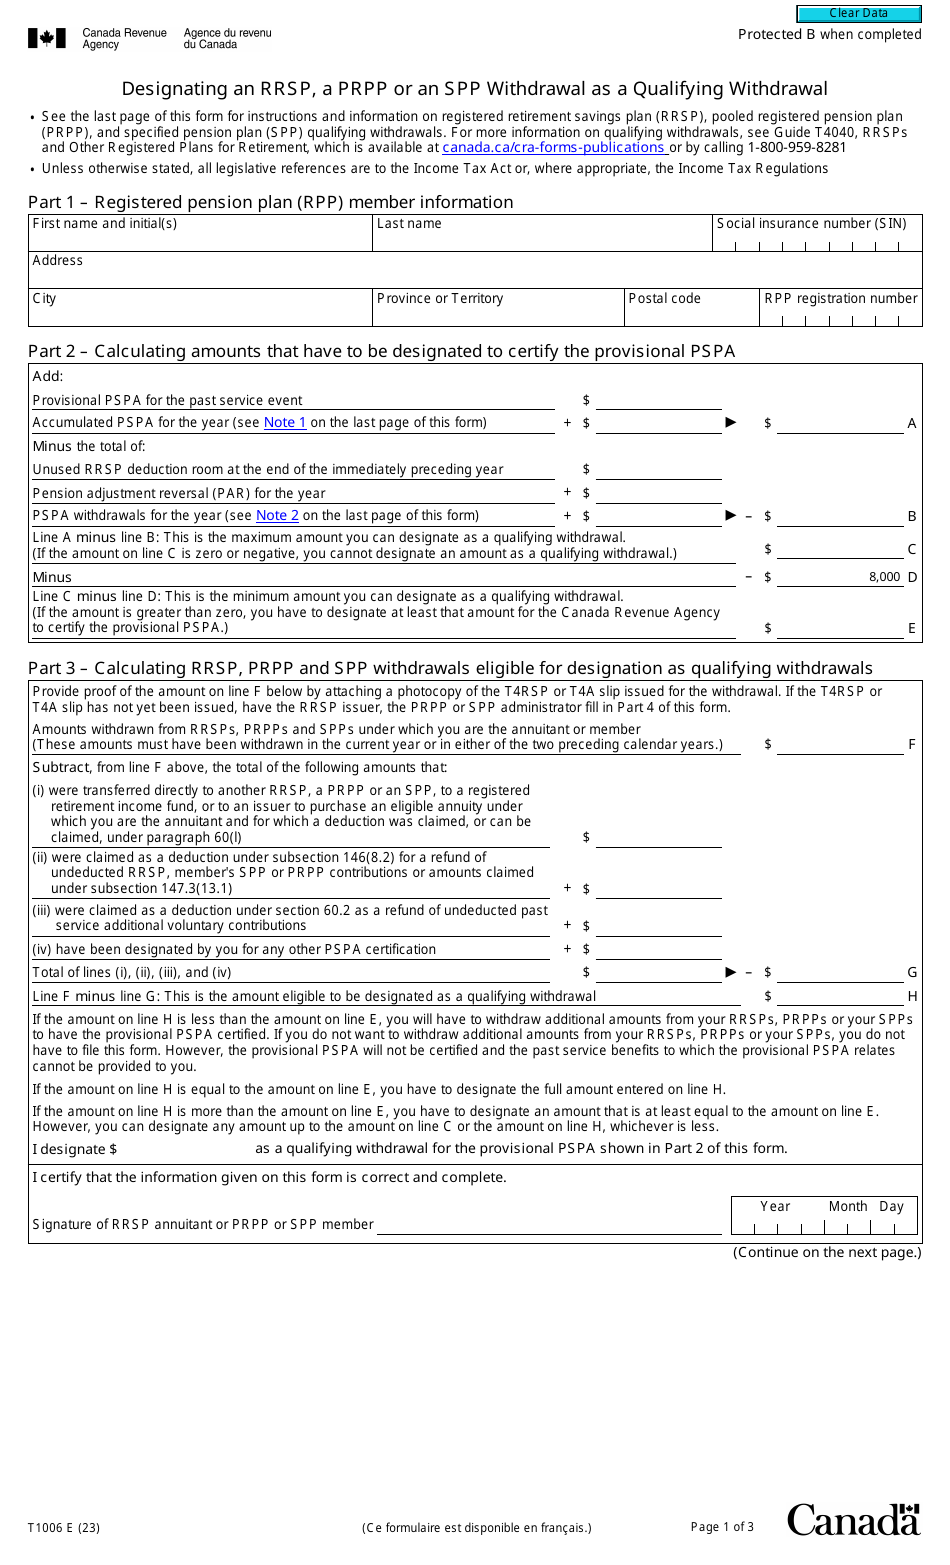 Form T1006 Designating an Rrsp, a Prpp or an Spp Withdrawal as a Qualifying Withdrawal - Canada, Page 1